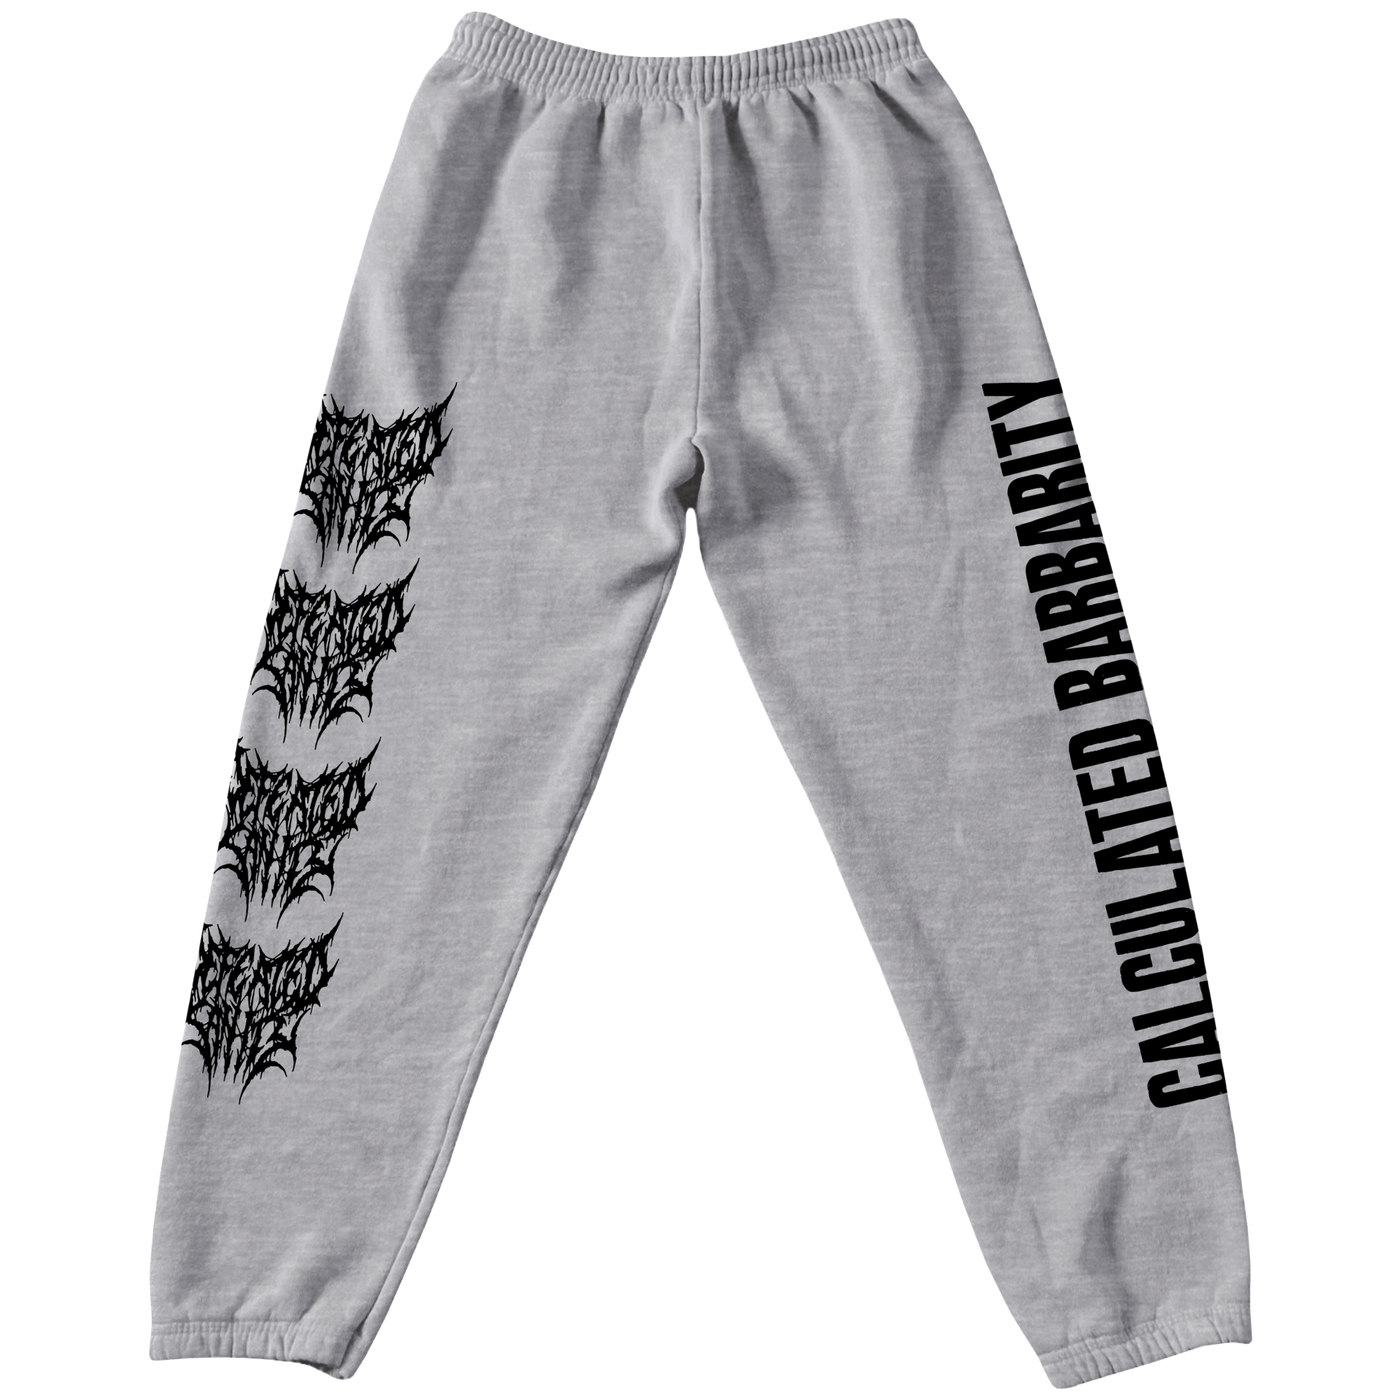 Defeated Sanity 'Calculated Barbarity' Sweatpants